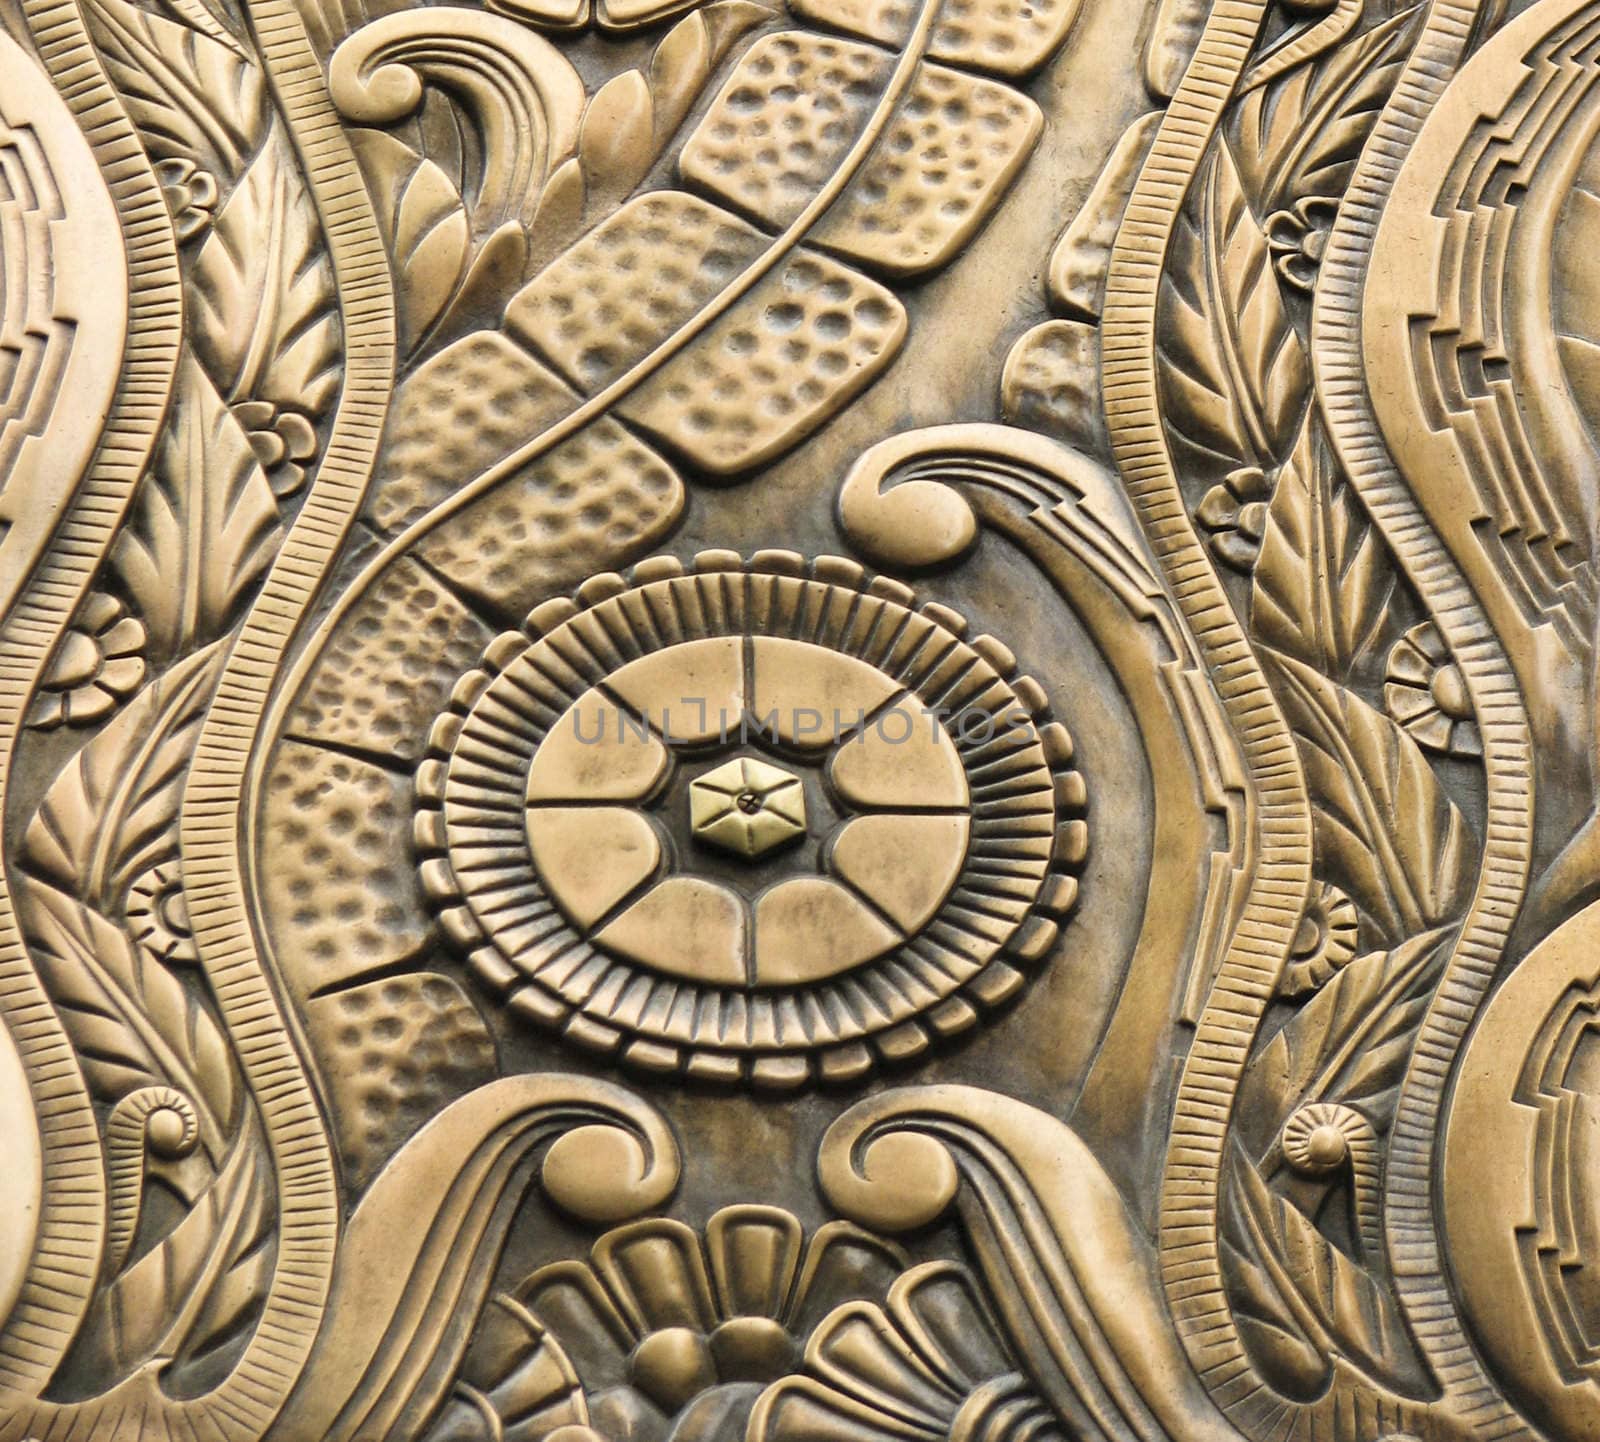 Abstract floral design carved into the brass exterior of a building